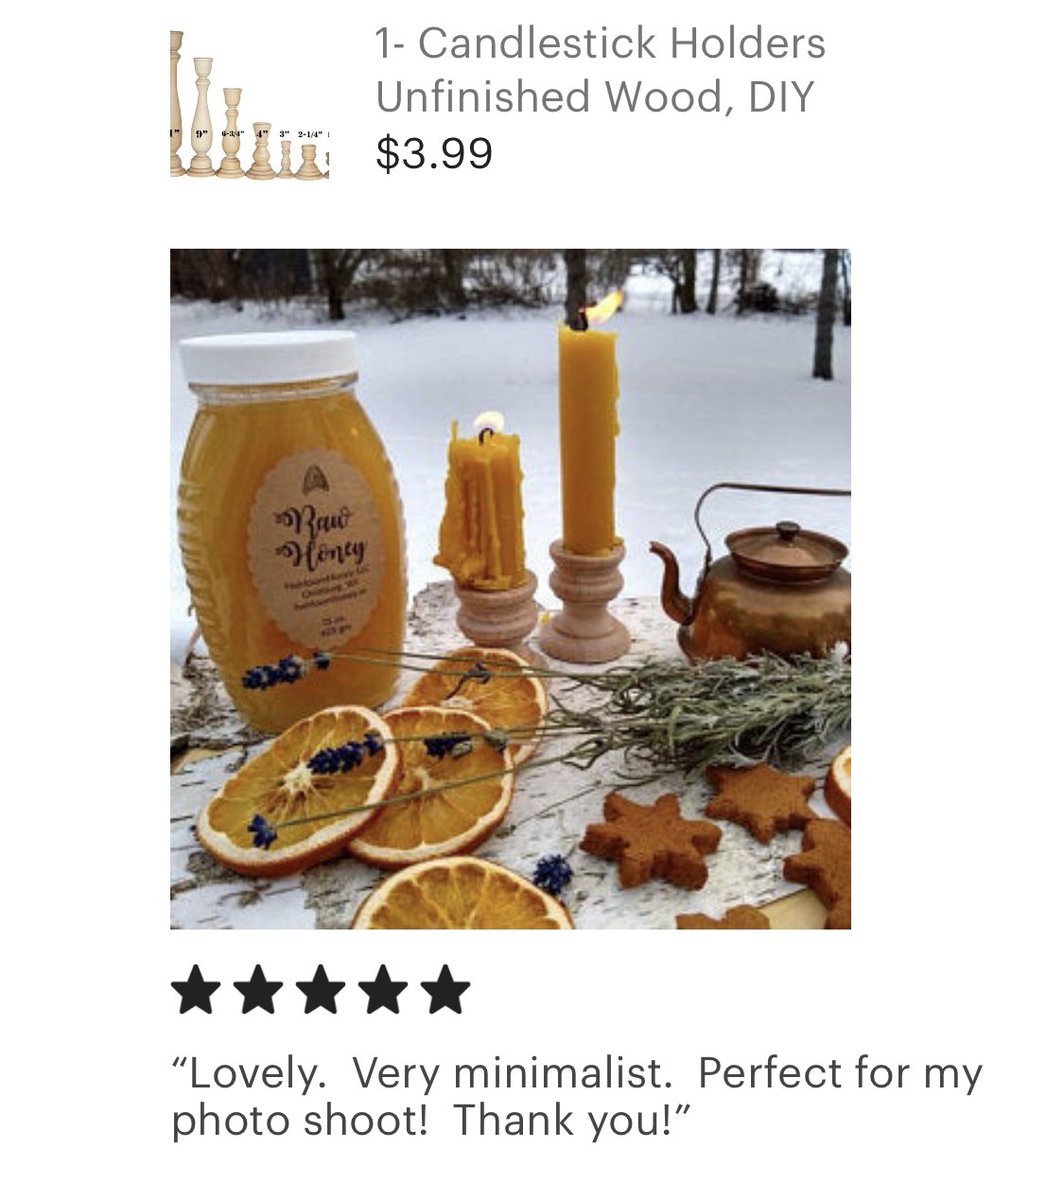 It's Five-Star Friday! ⭐️⭐️⭐️⭐️⭐️

Loving this set-up using my candlesticks! 🍯

Want to recreate this look? Purchase👇
ow.ly/Sgd950Dms1C

#femprenuer #lifebydesign #smallbizowners #smallbiz #5stars #5starsfriday